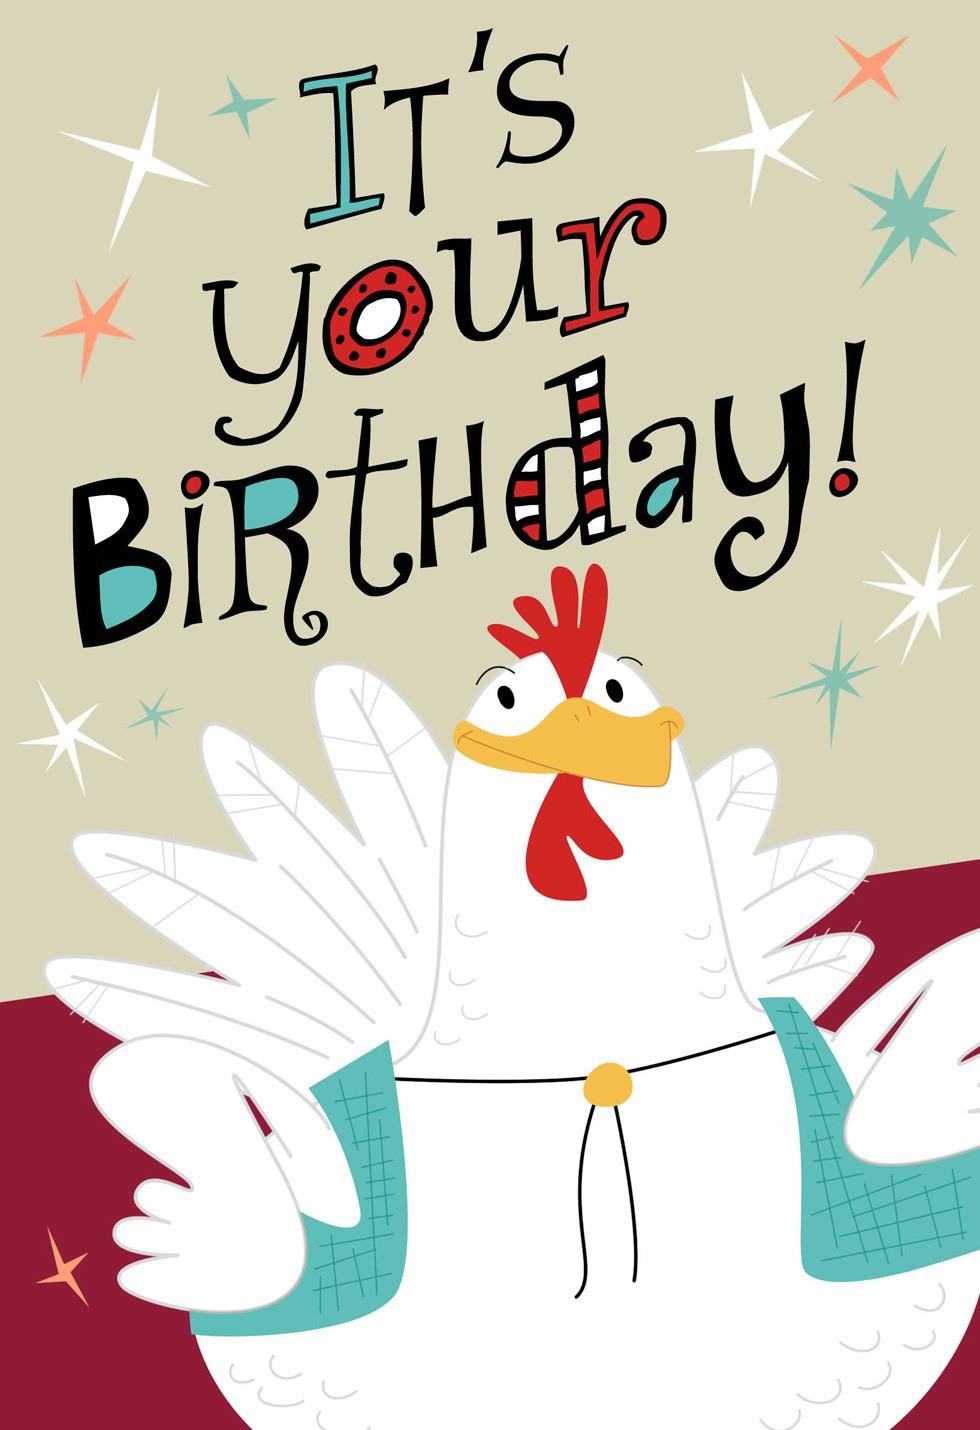 Birthday Cards Online
 Chicken and Accordion Musical Birthday Card Greeting